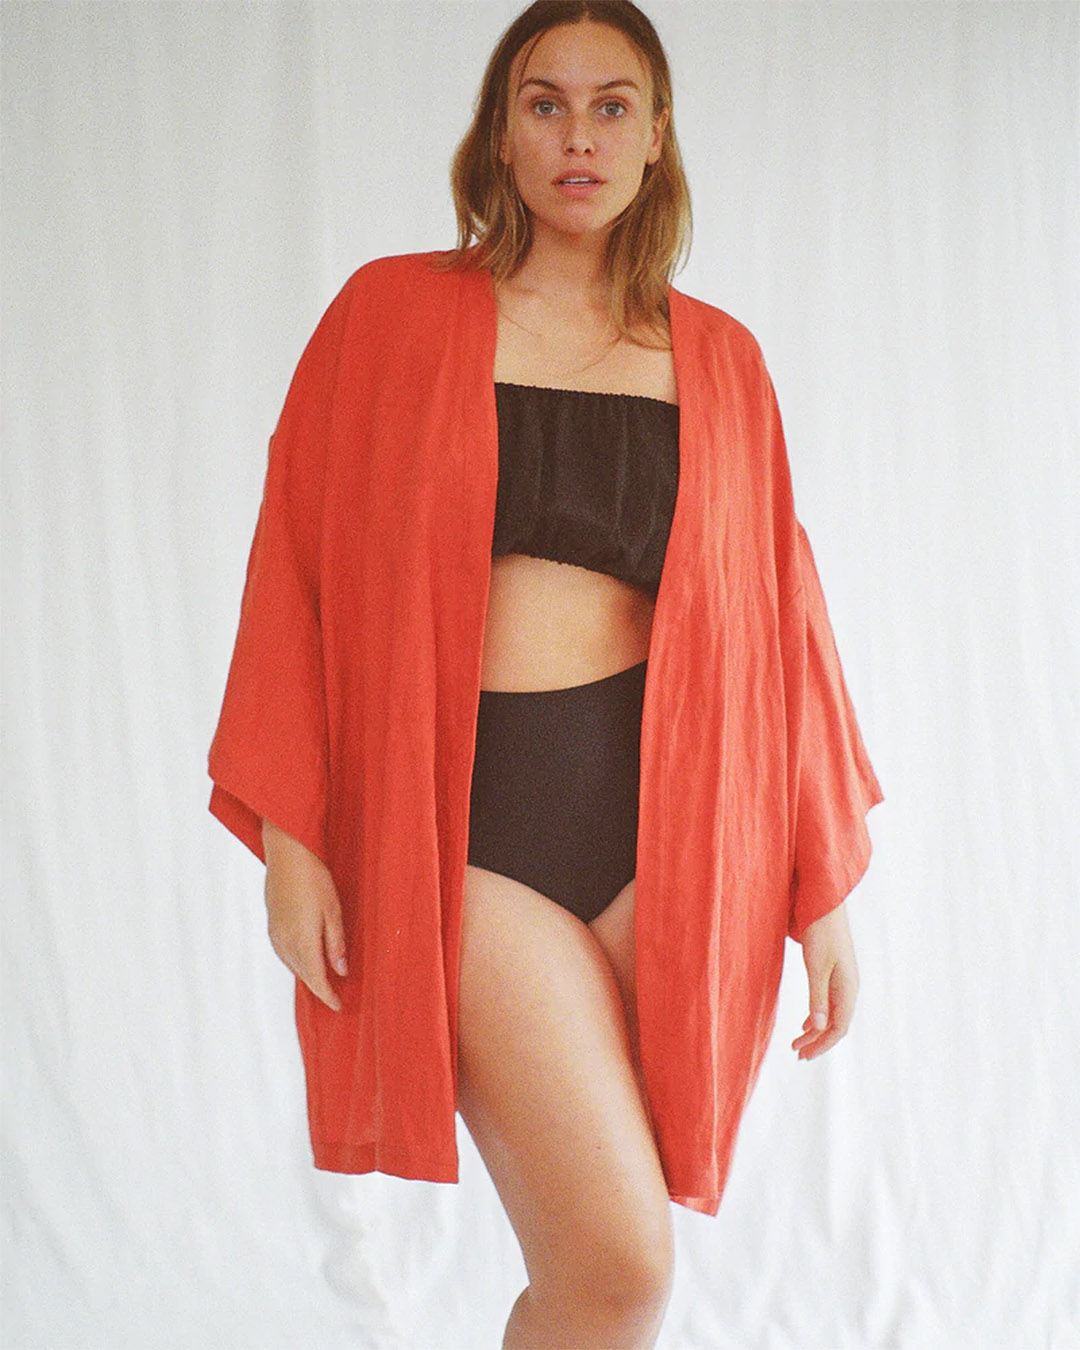 A woman wearing an orange kimono style dress over brown high waisted separates. 